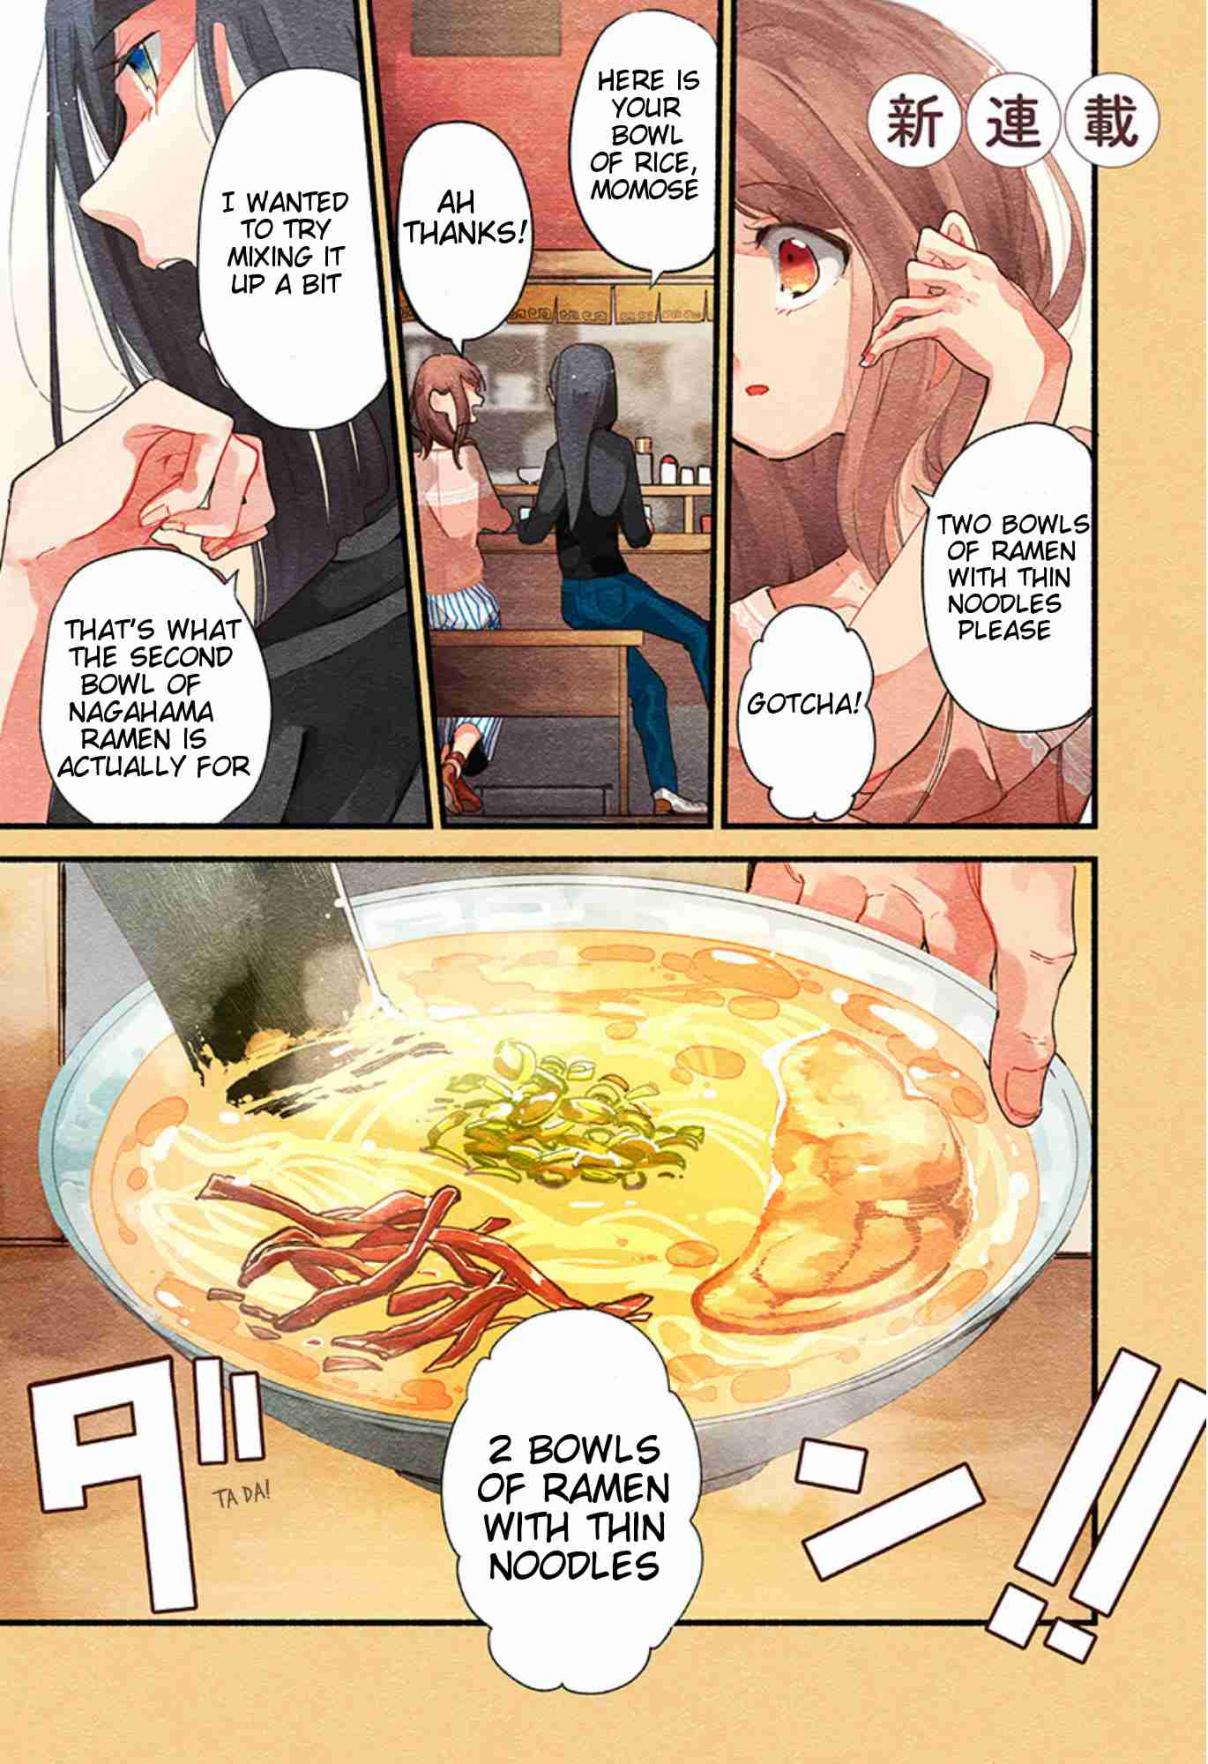 Suito to! Vol. 1 Ch. 1 Grilled Beef